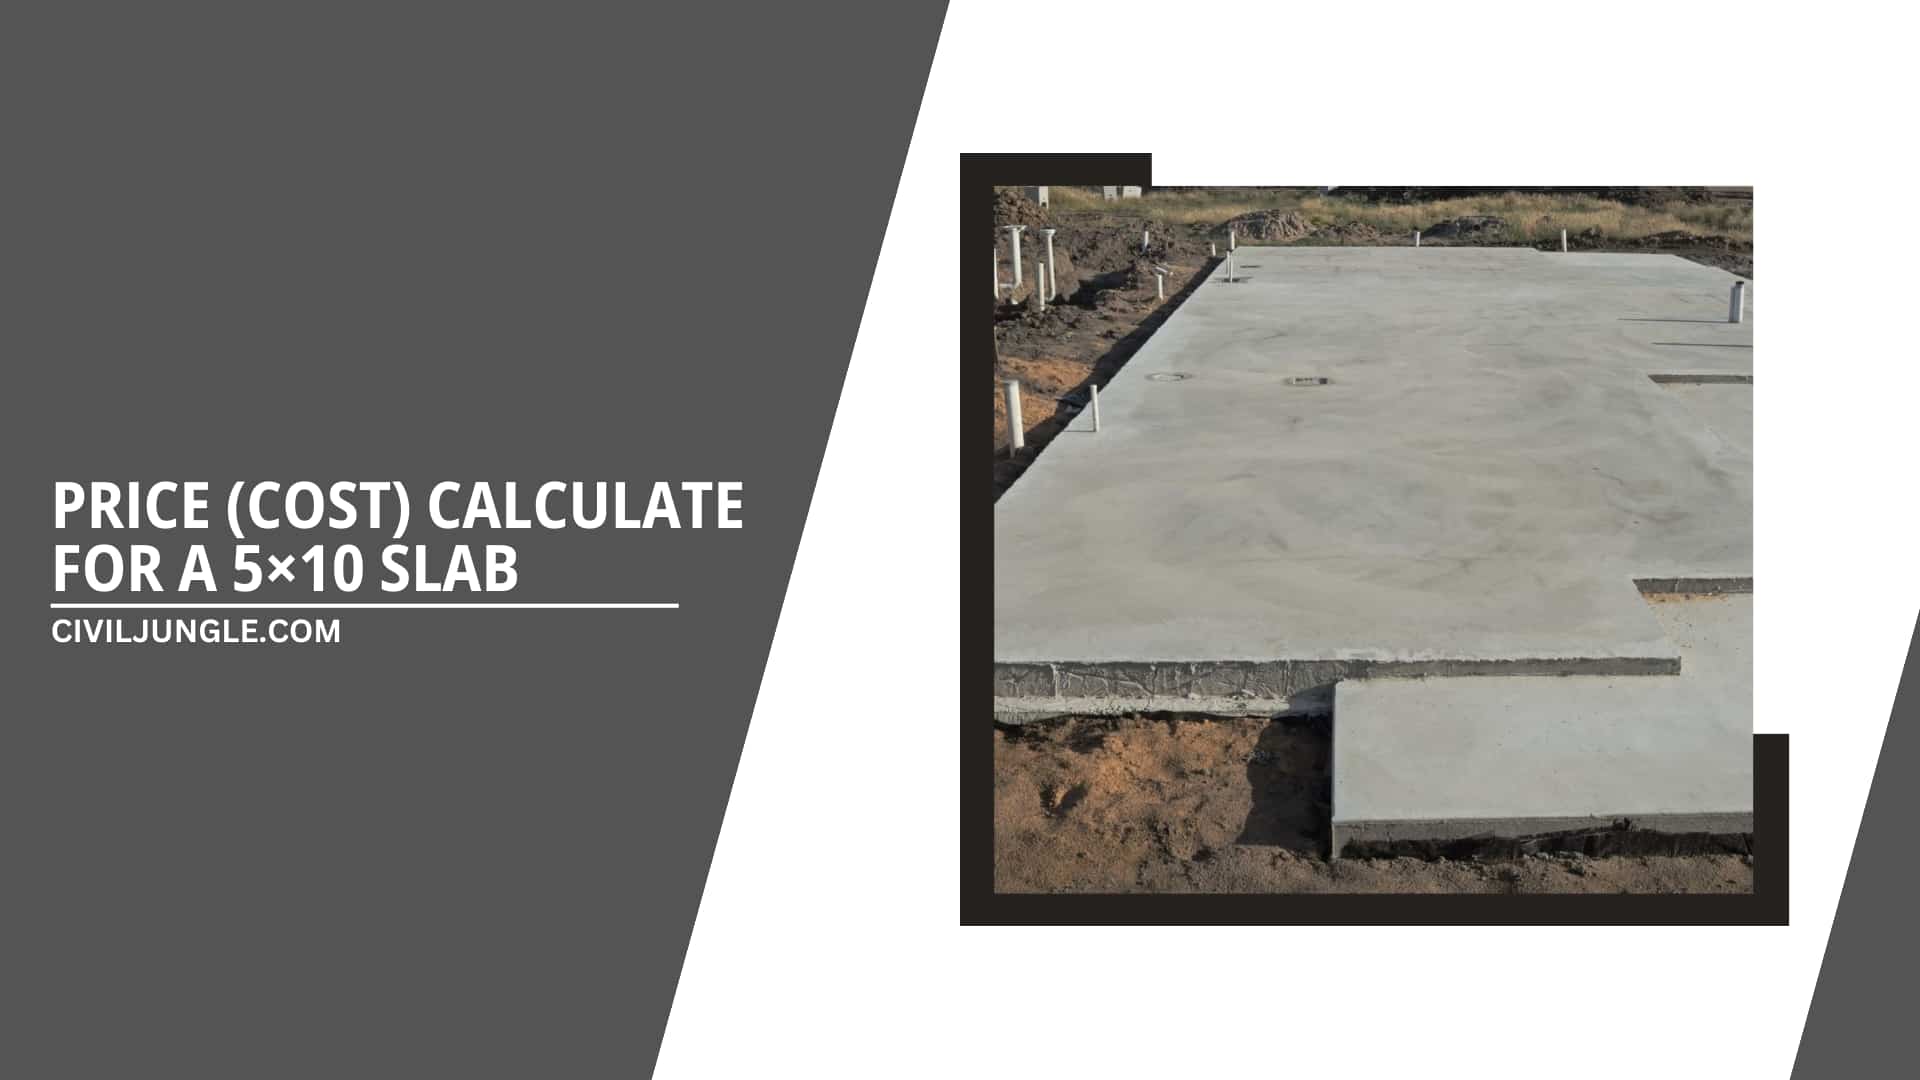 Price (Cost) Calculate for a 5×10 Slab.